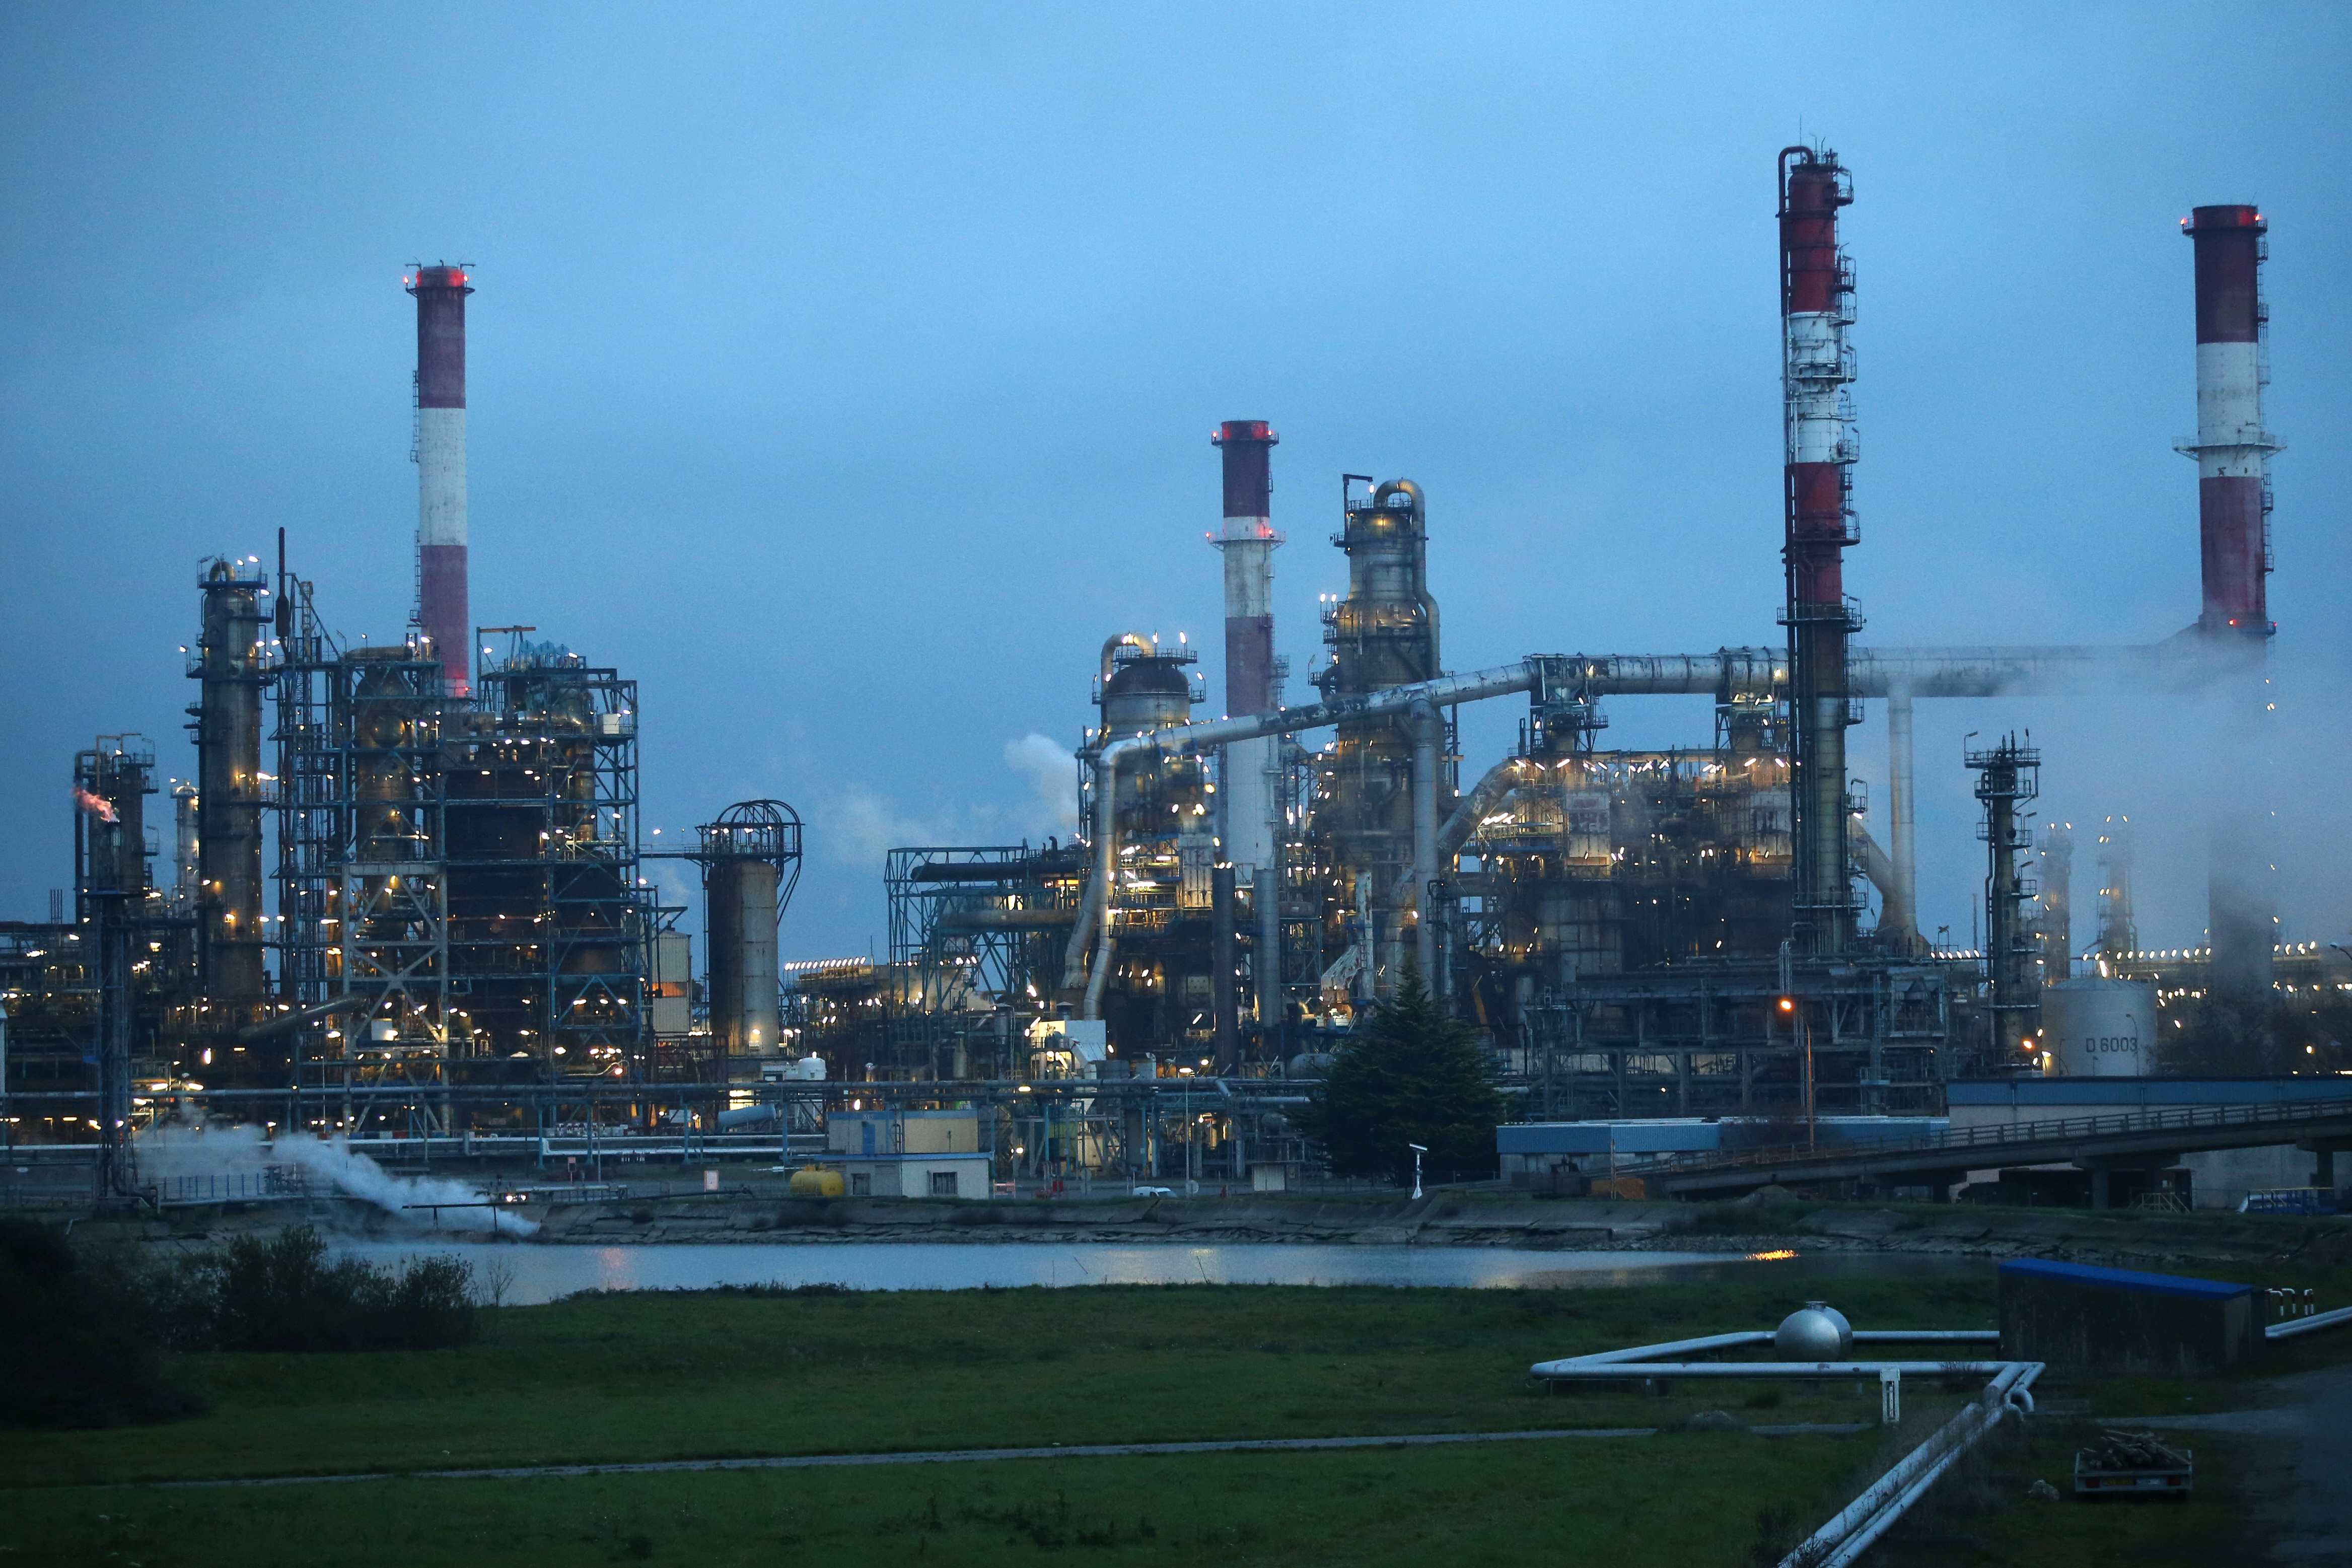 A view shows the French oil giant Total refinery in Donges